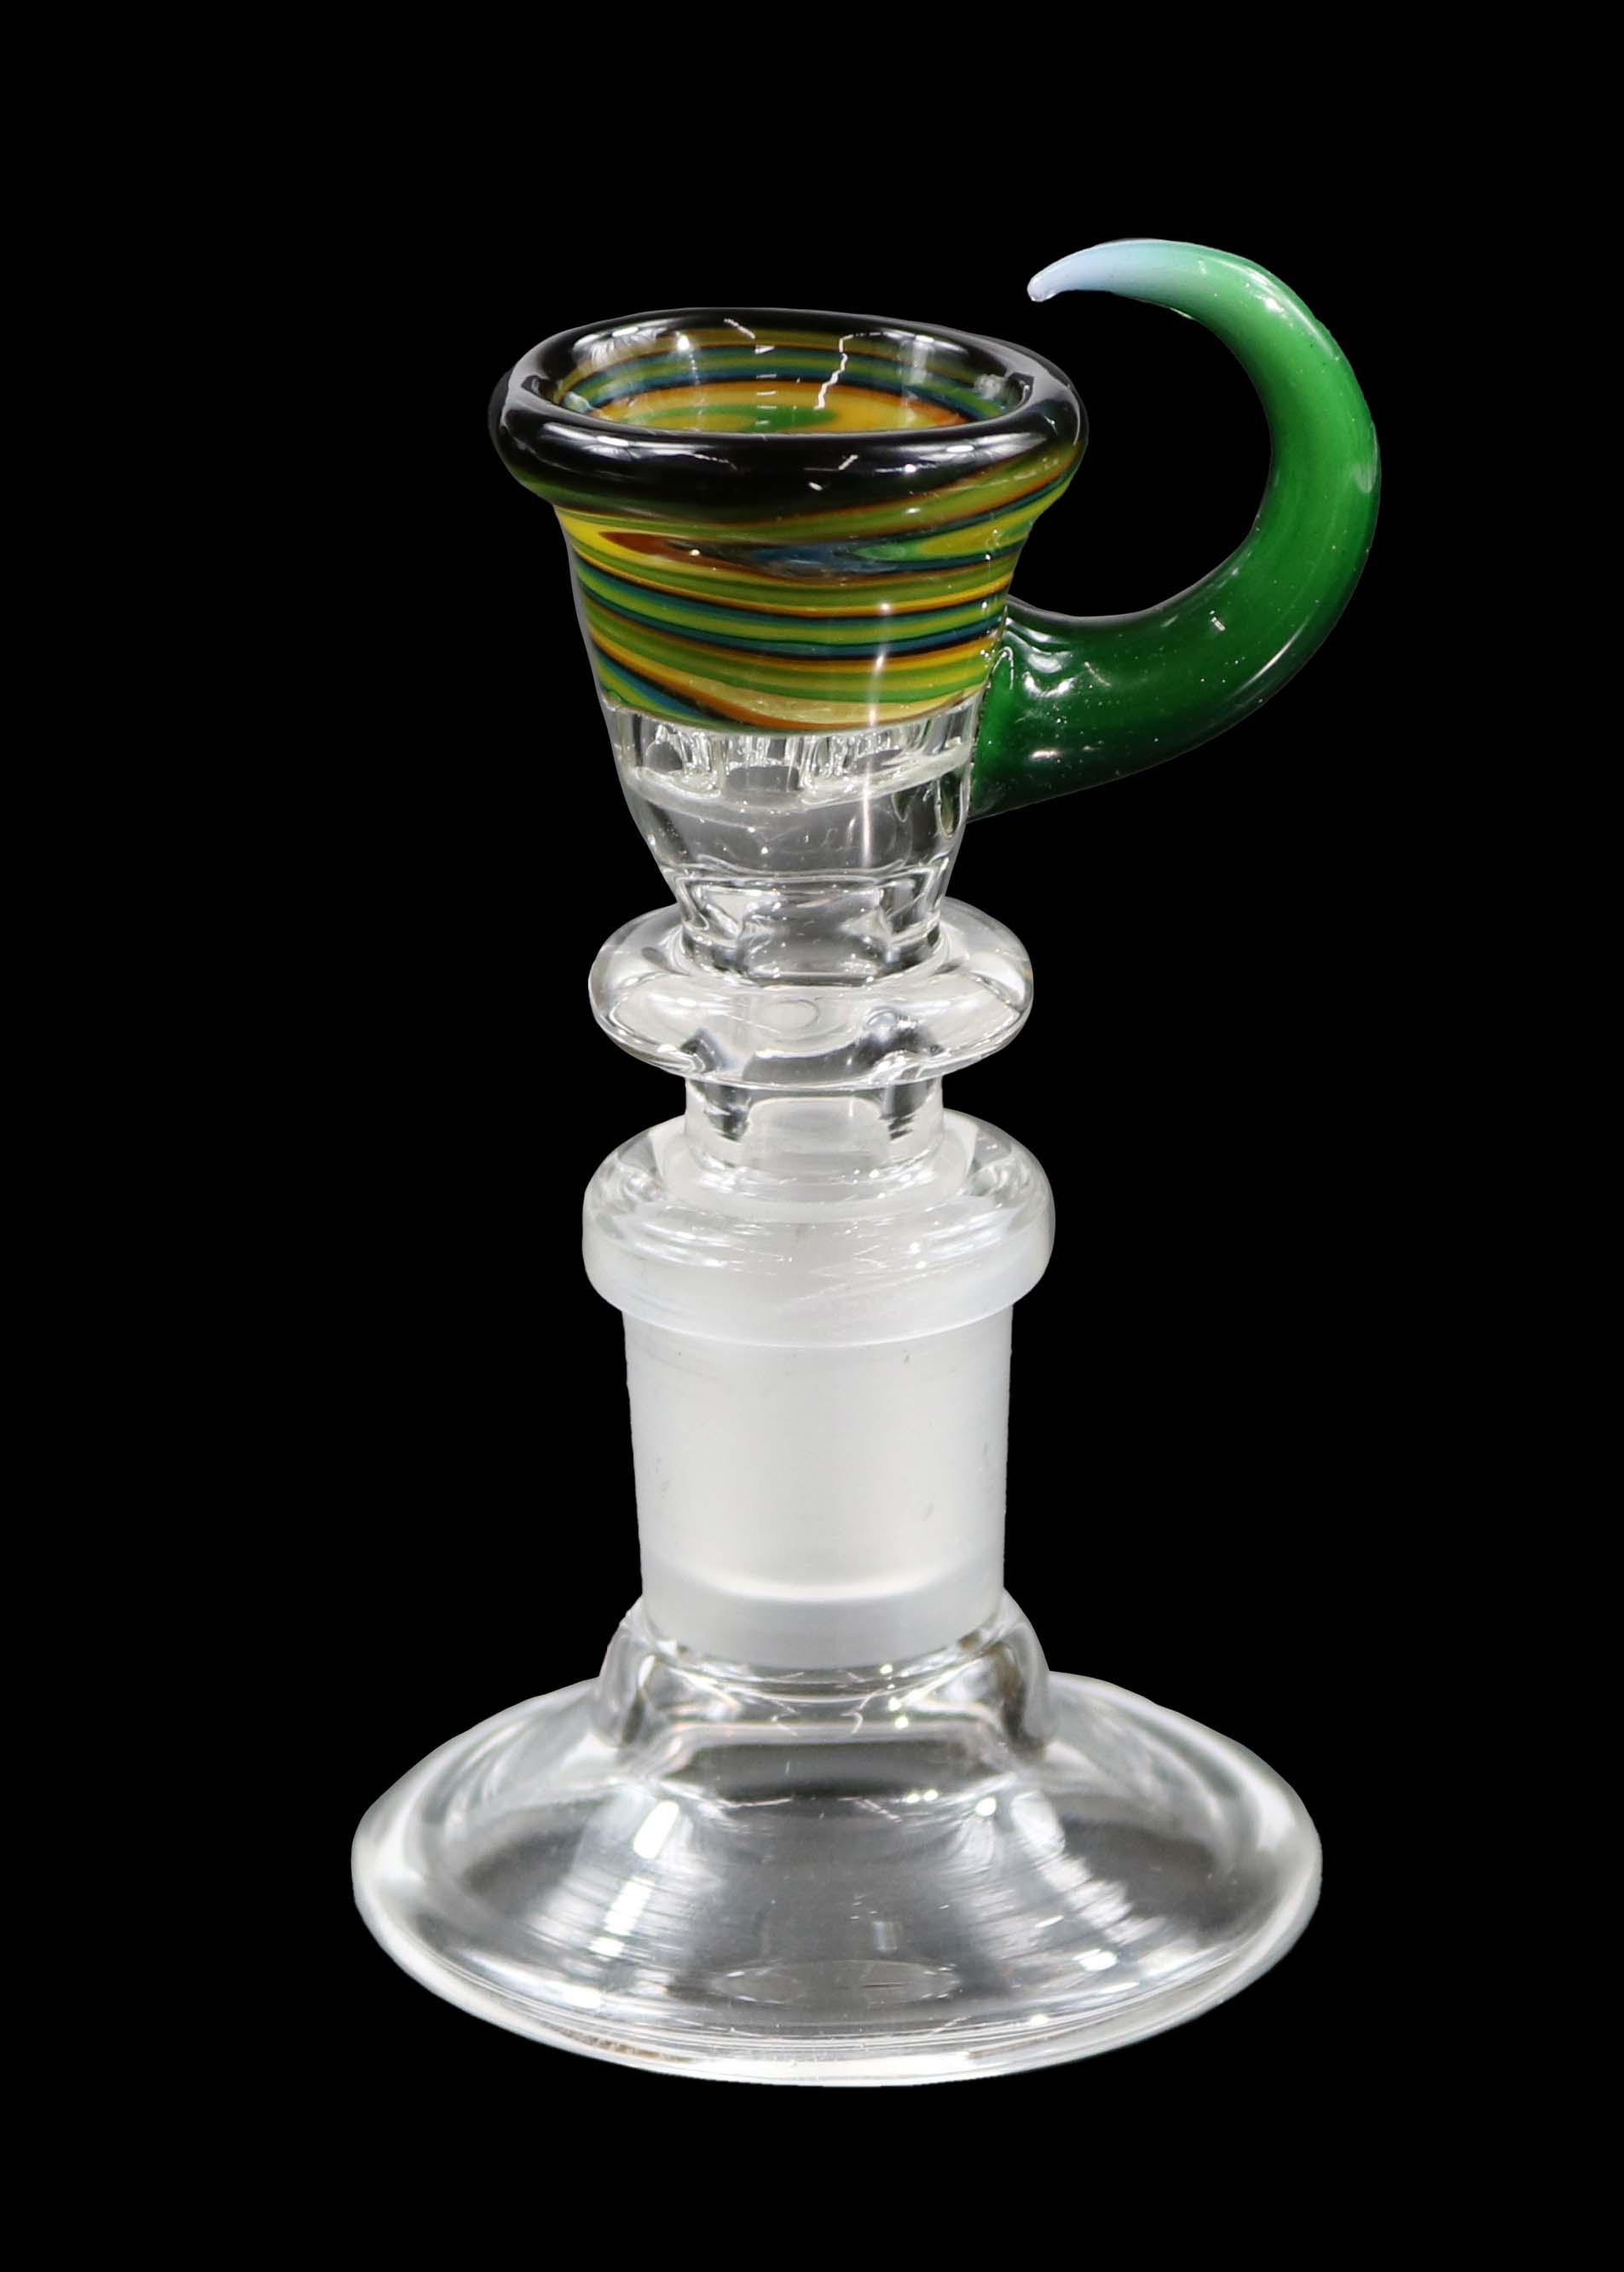 14mm Martini Bong Slide with built in screen from Glass by Slick - Green/Yellow/Orange